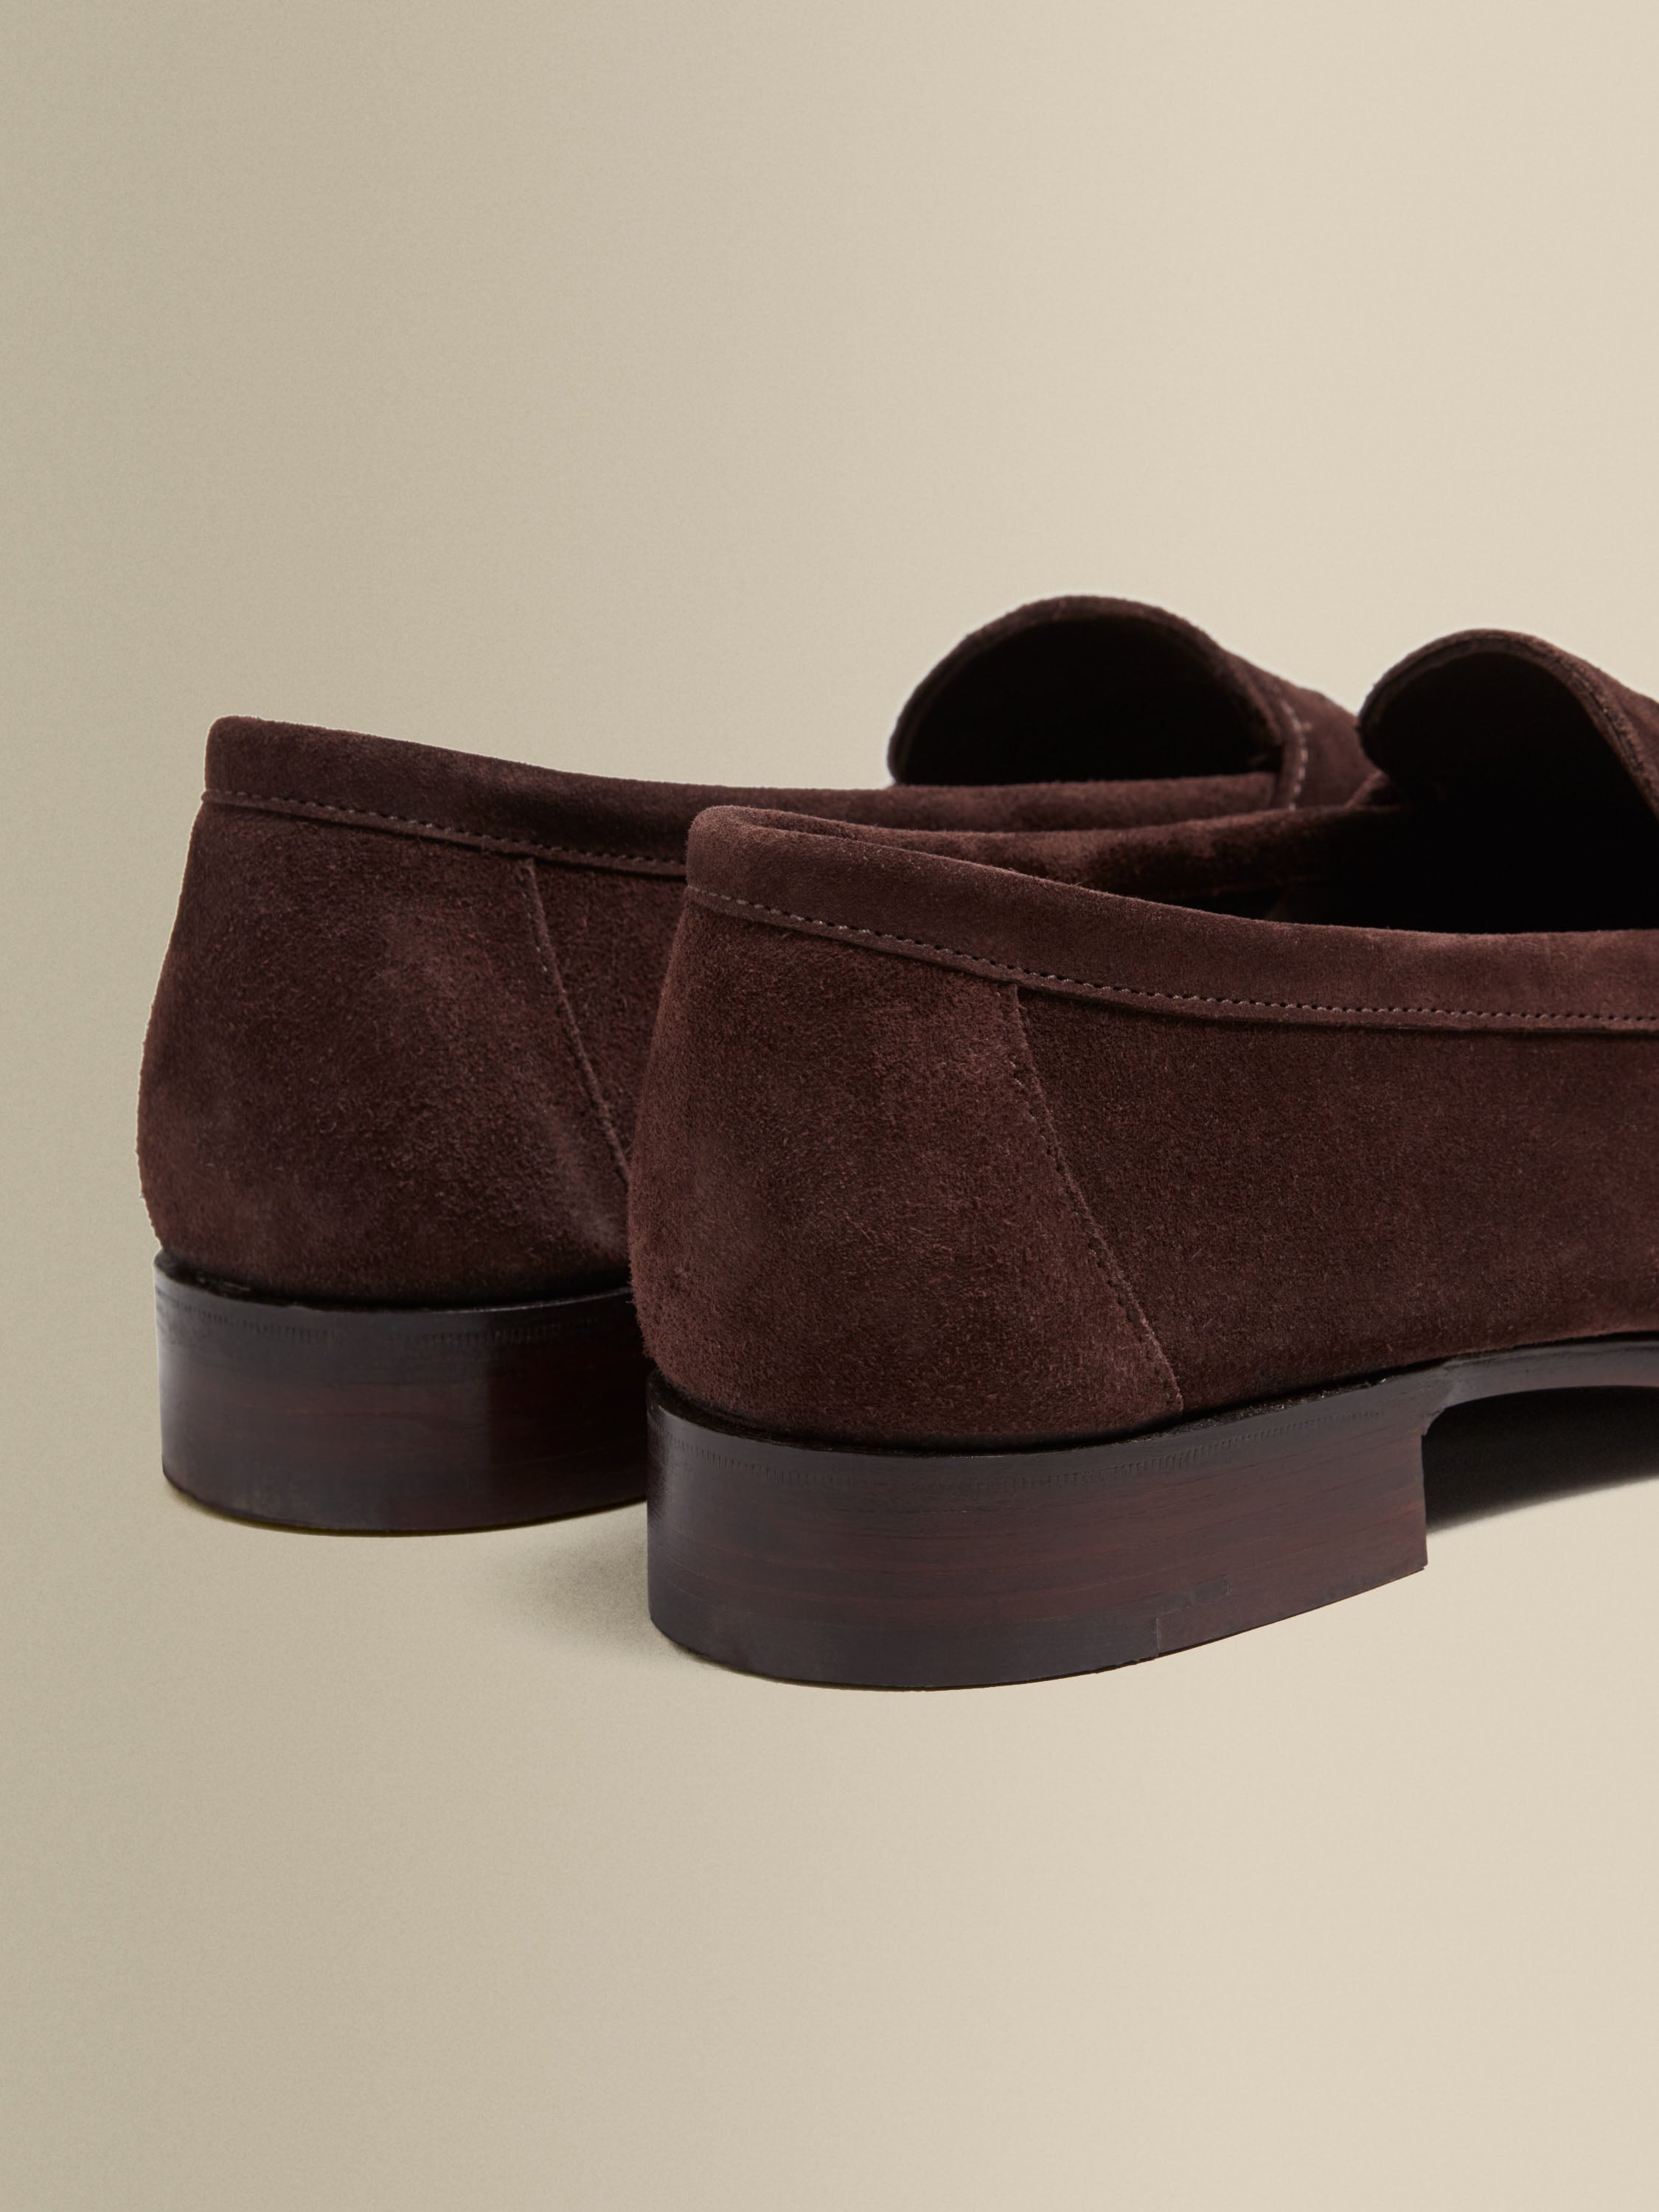 Suede Plit Toe Loafer Shoes Coffee Product Image Heel